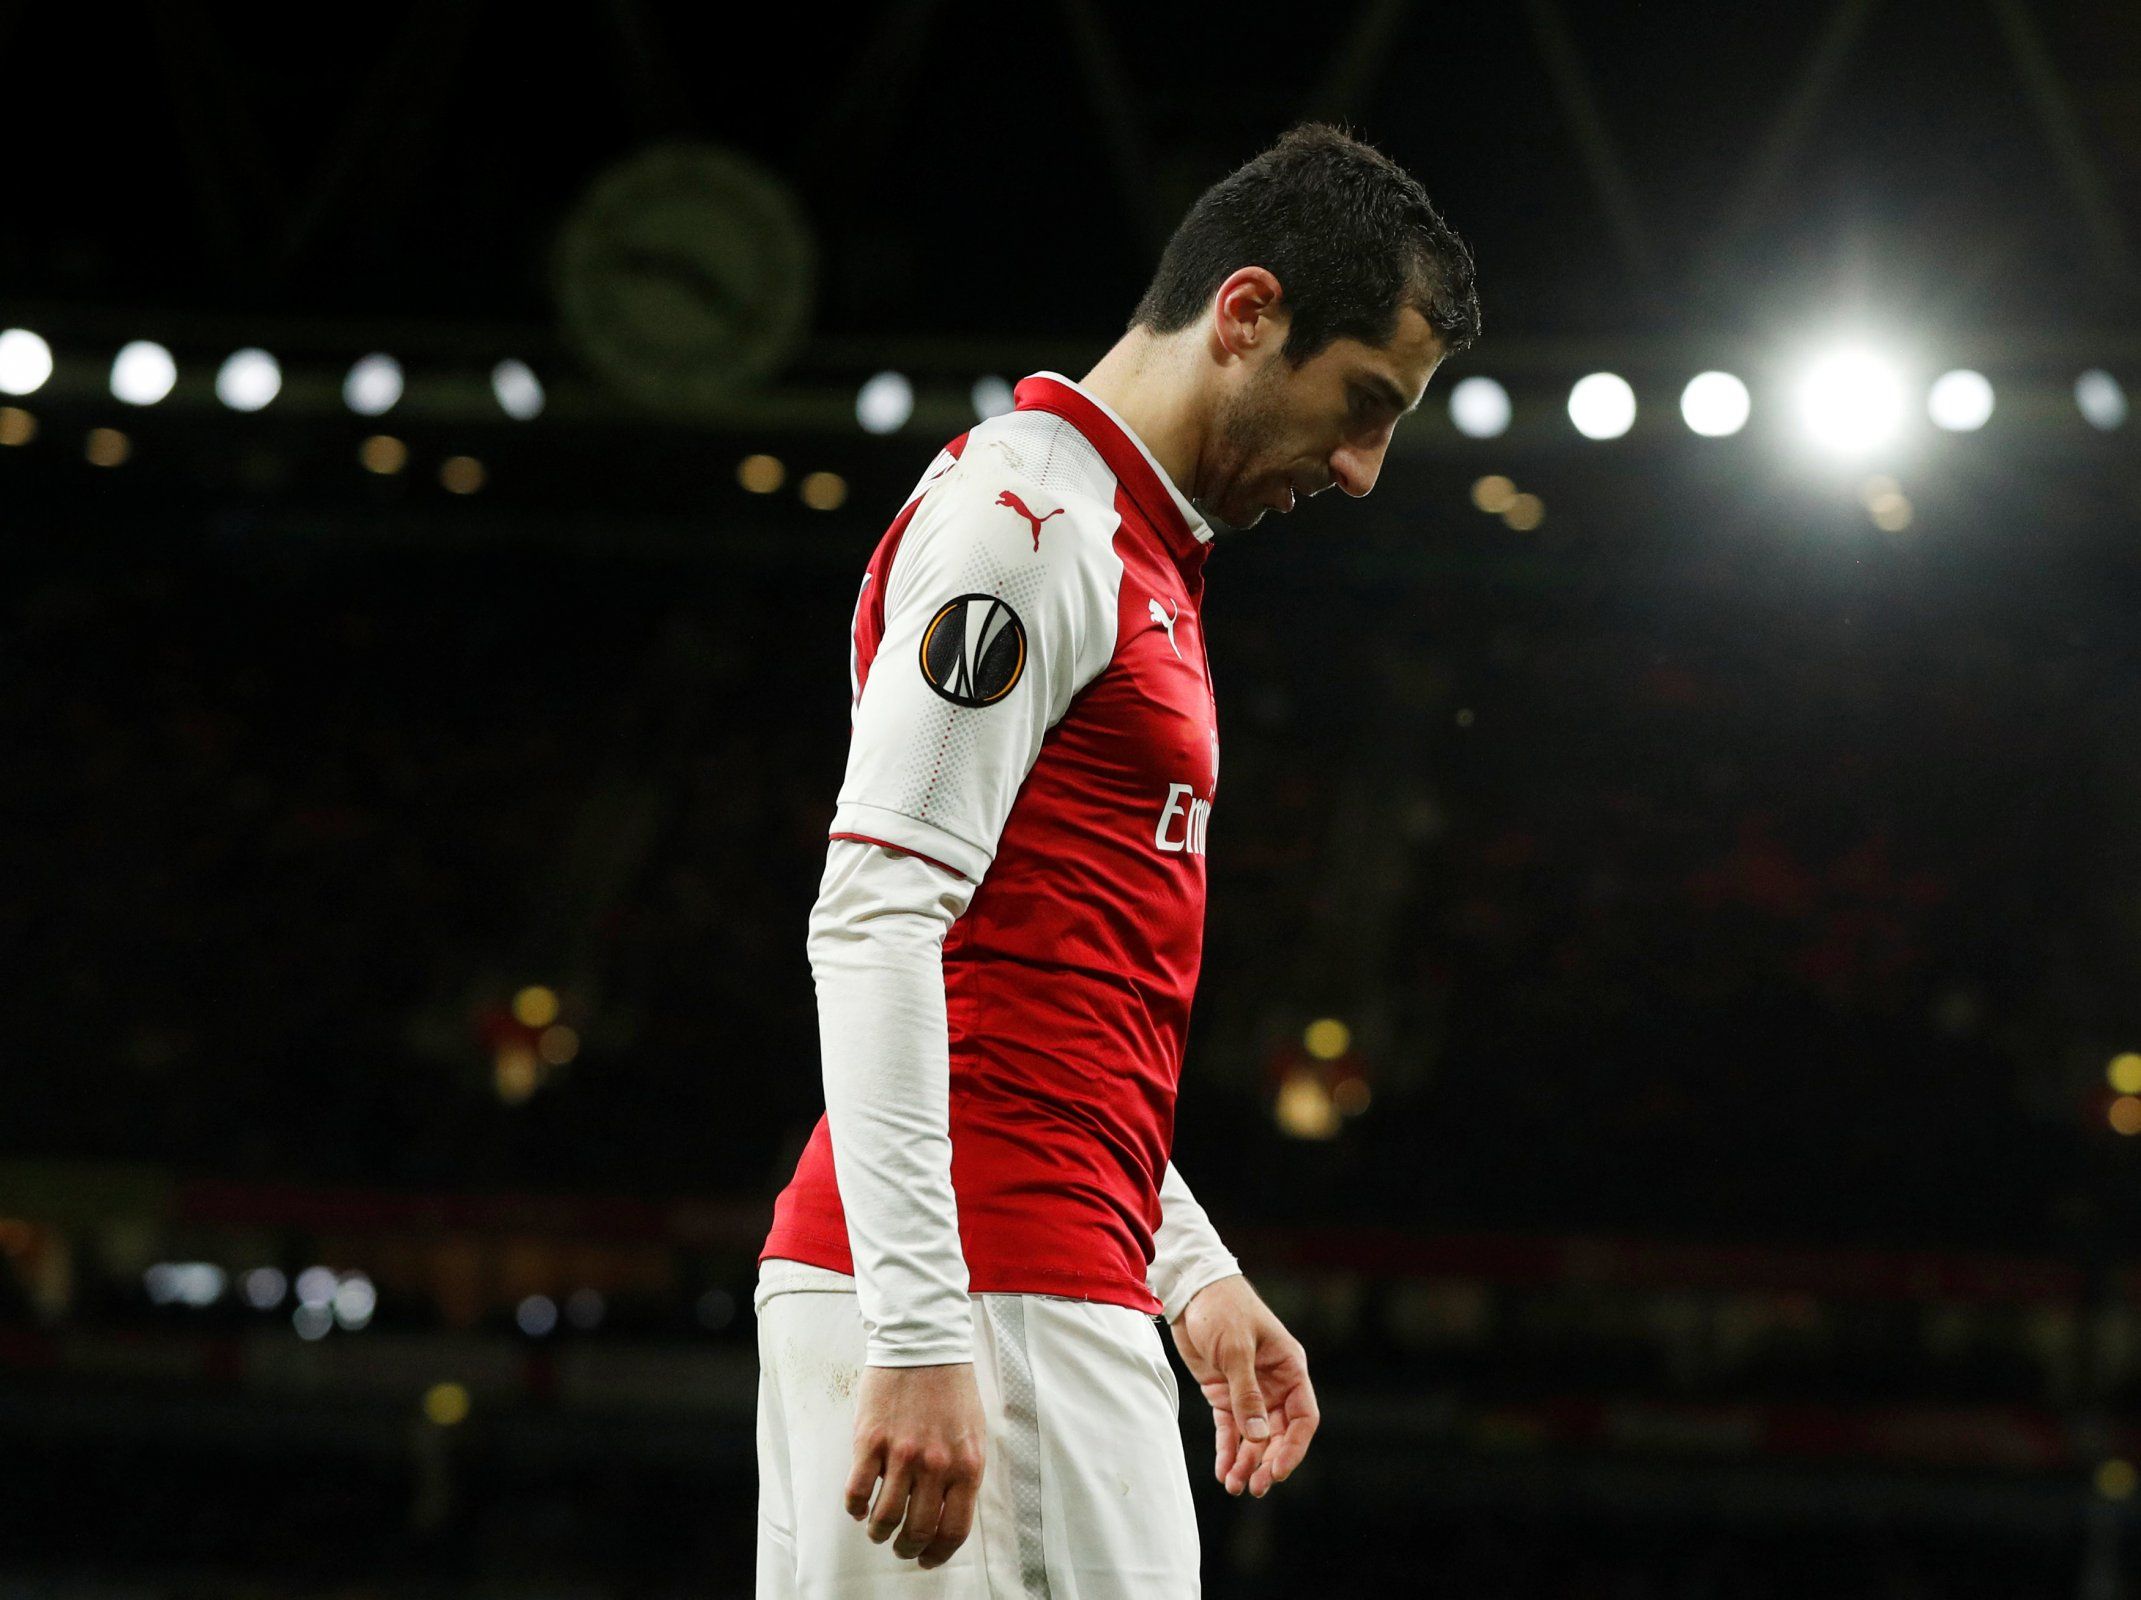 Henrikh Mkhitaryan leaves the pitch injured during Arsenal's clash against CSKA Moscow